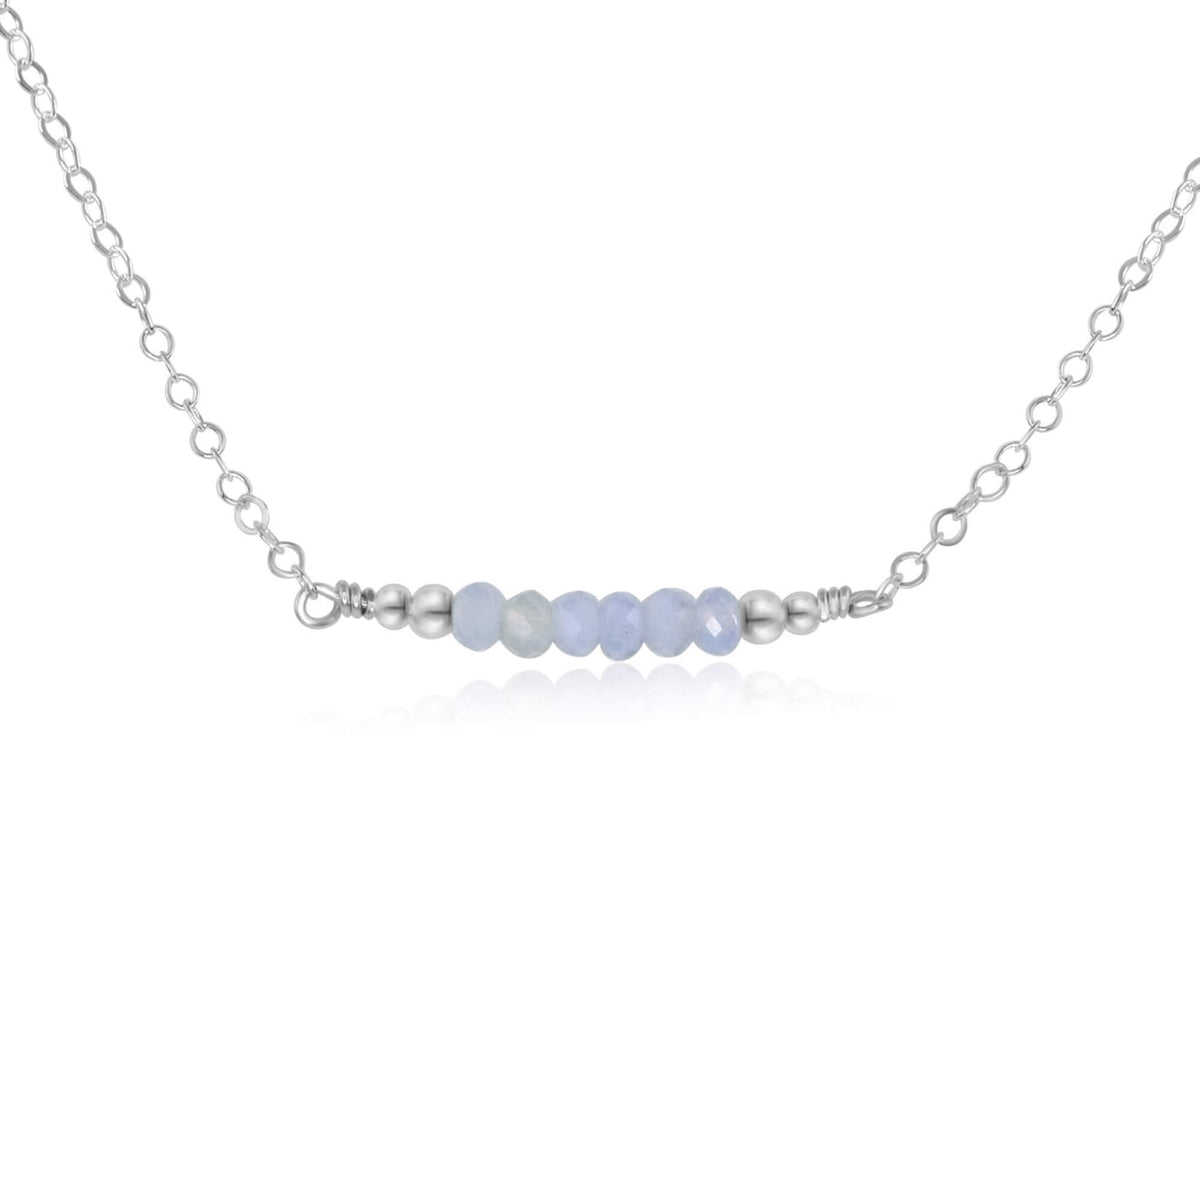 Faceted Bead Bar Necklace - Blue Lace Agate - Sterling Silver - Luna Tide Handmade Jewellery